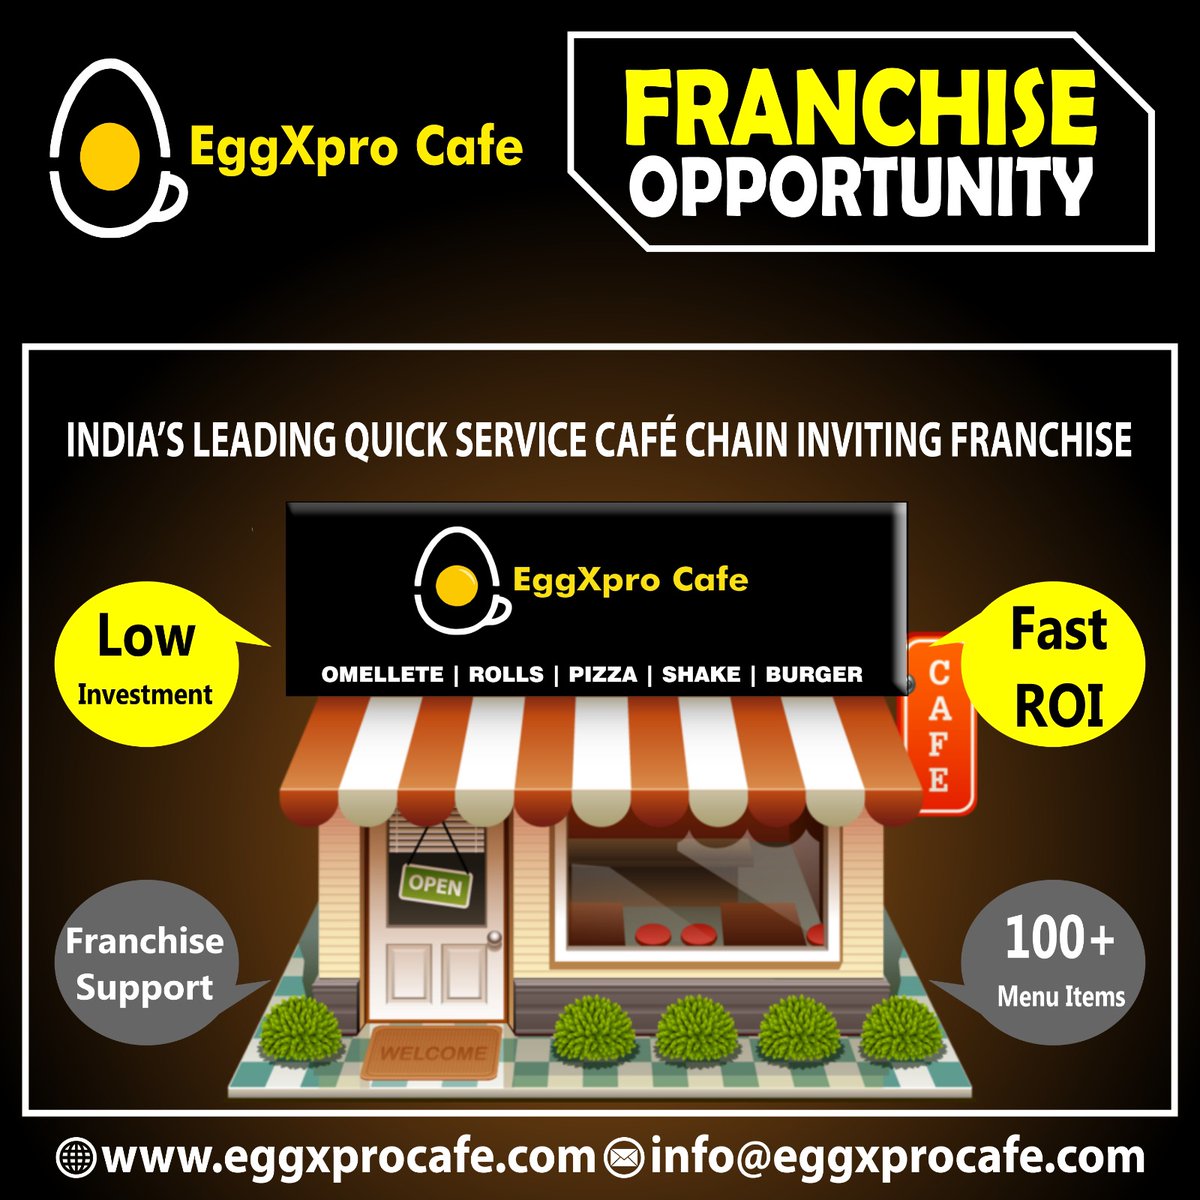 food franchise is the one which has huge brand base, Eggxpro is one of the famous egg food brand of India and also provide healthy food franchise👍
.
#eggxprocafe #foodfranchise #business #food #restaurant #eggdishes #HighProfit #foodie #cafefranchise #QuickService #eggfood #eggs